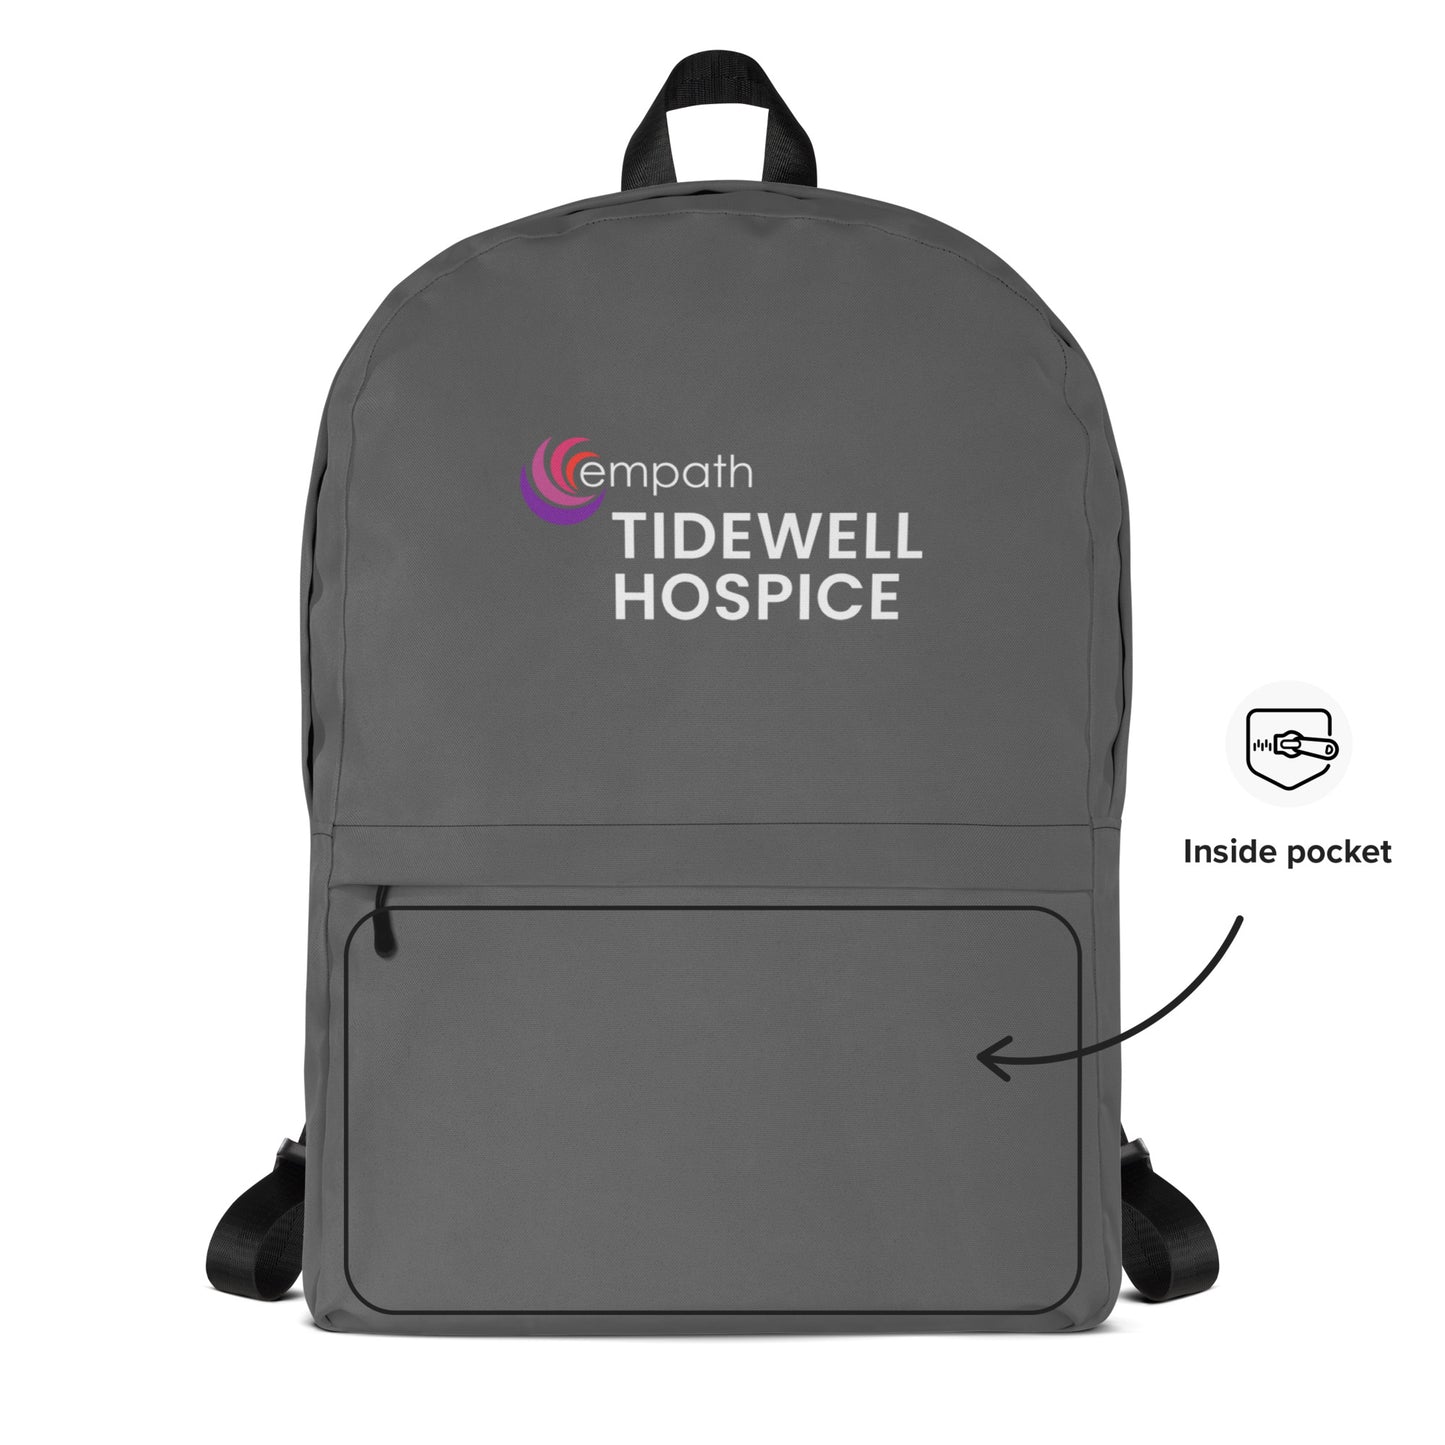 All-Over Print Backpack - Tidewell Hospice